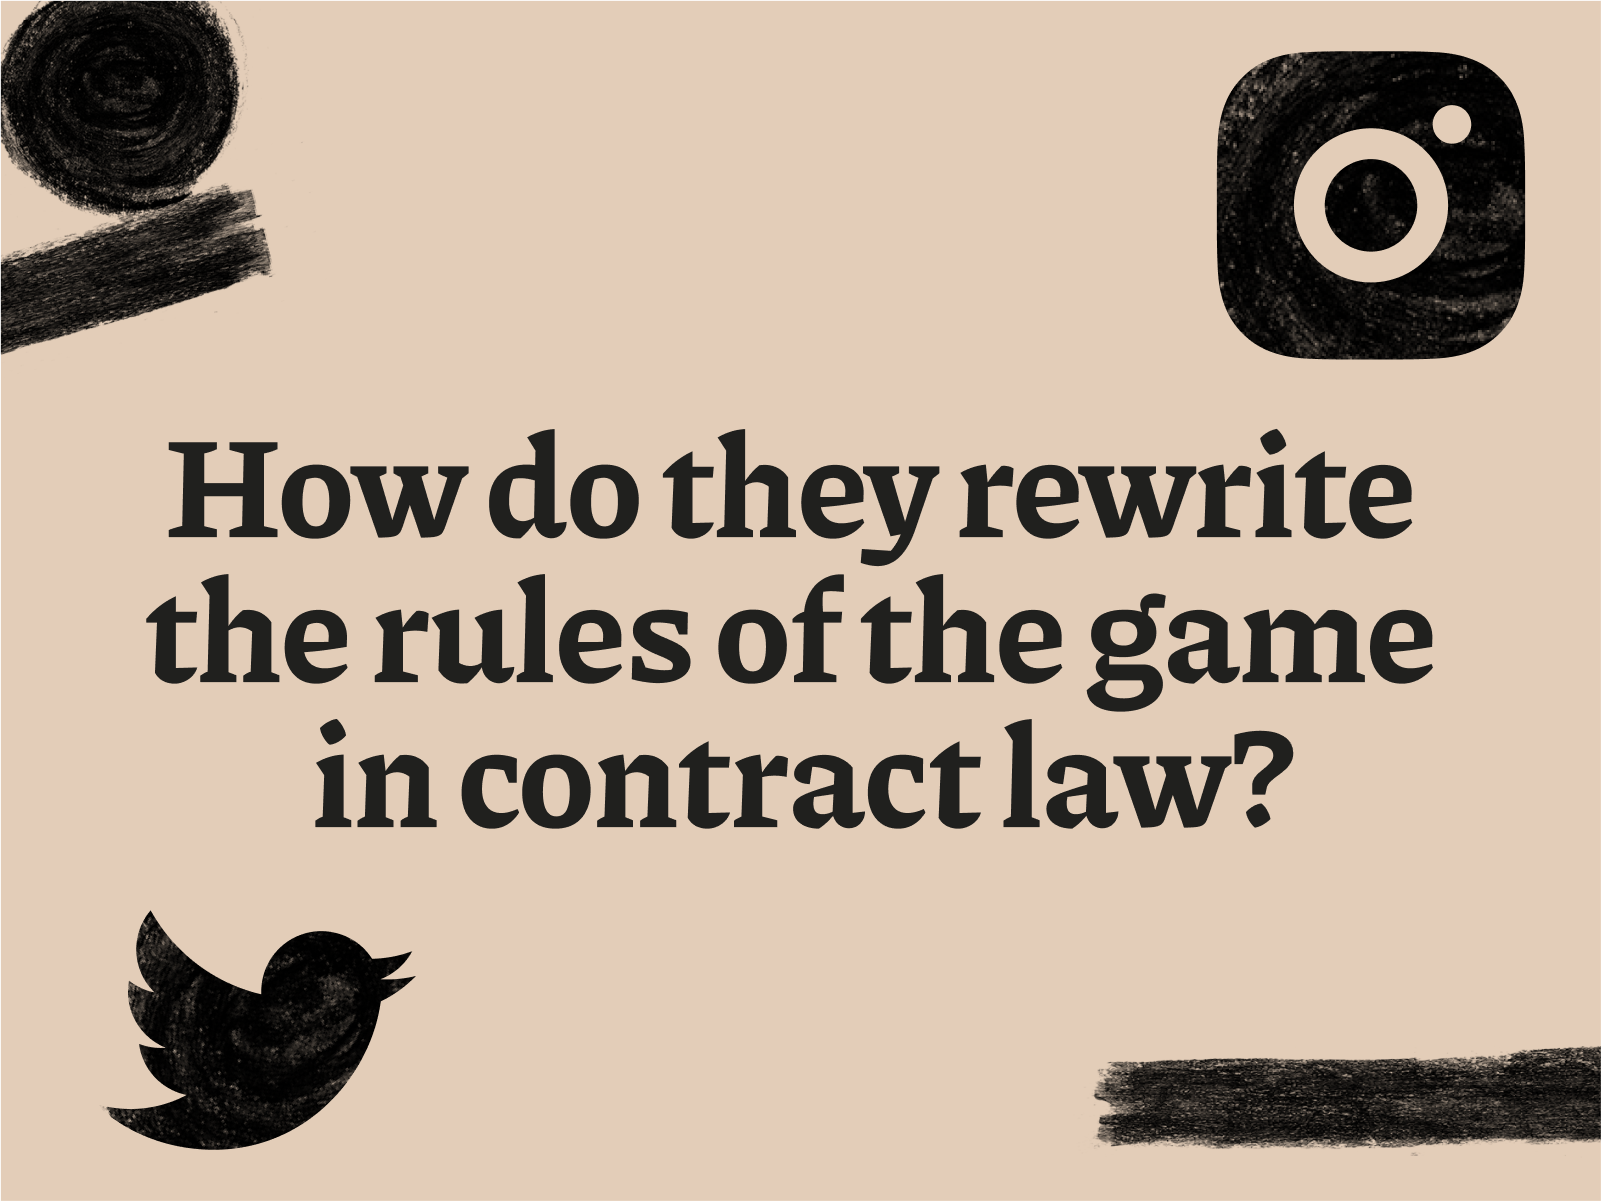 Social media rewrites the rules of the game in contract law